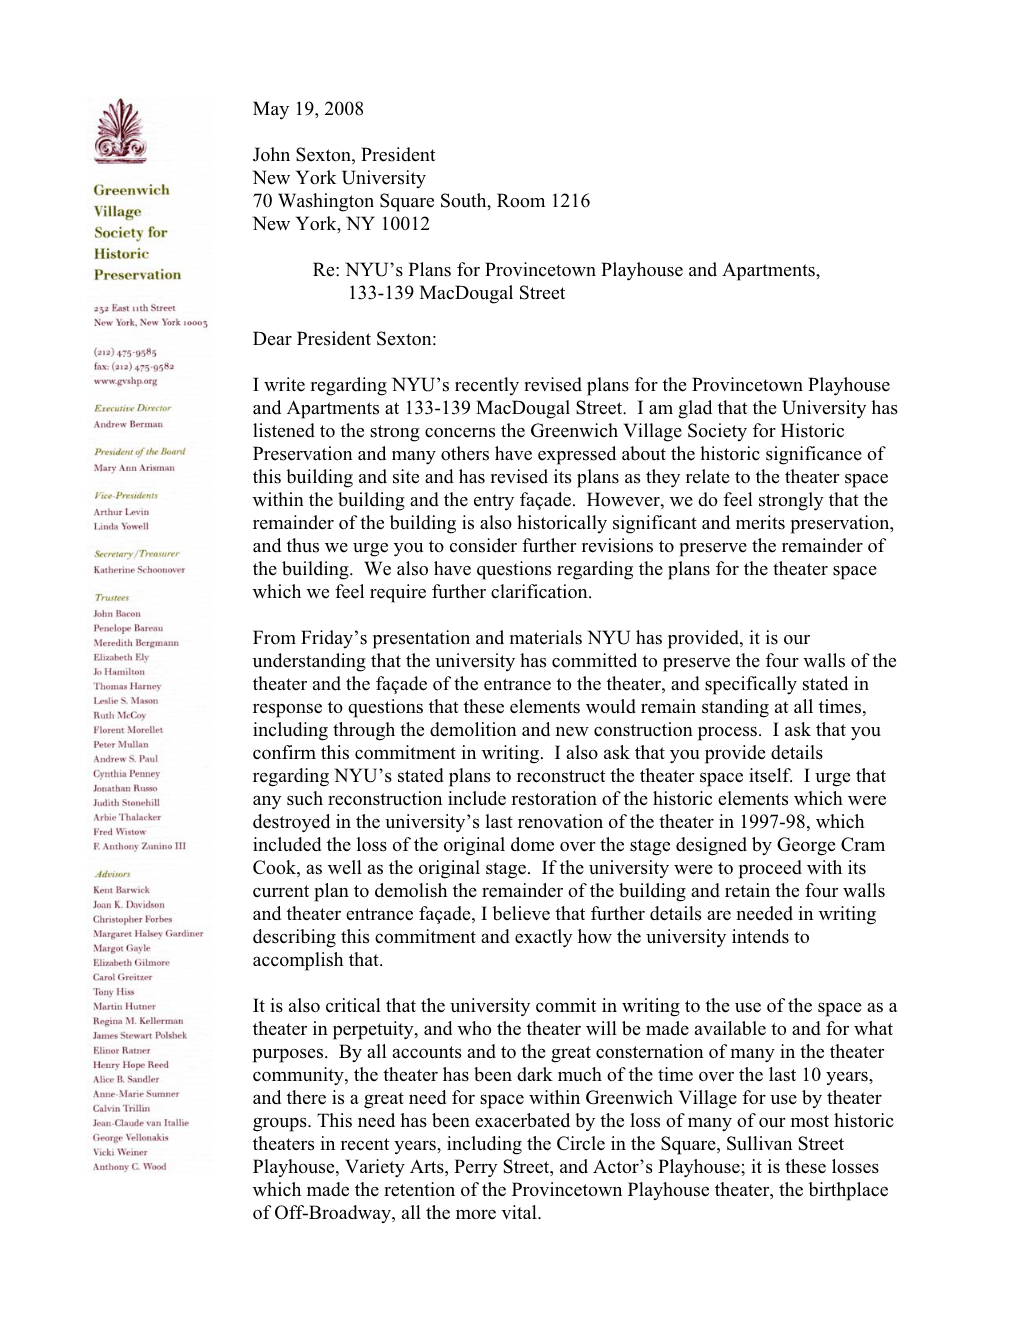 Letter to NYU About Revised Demolition Plans